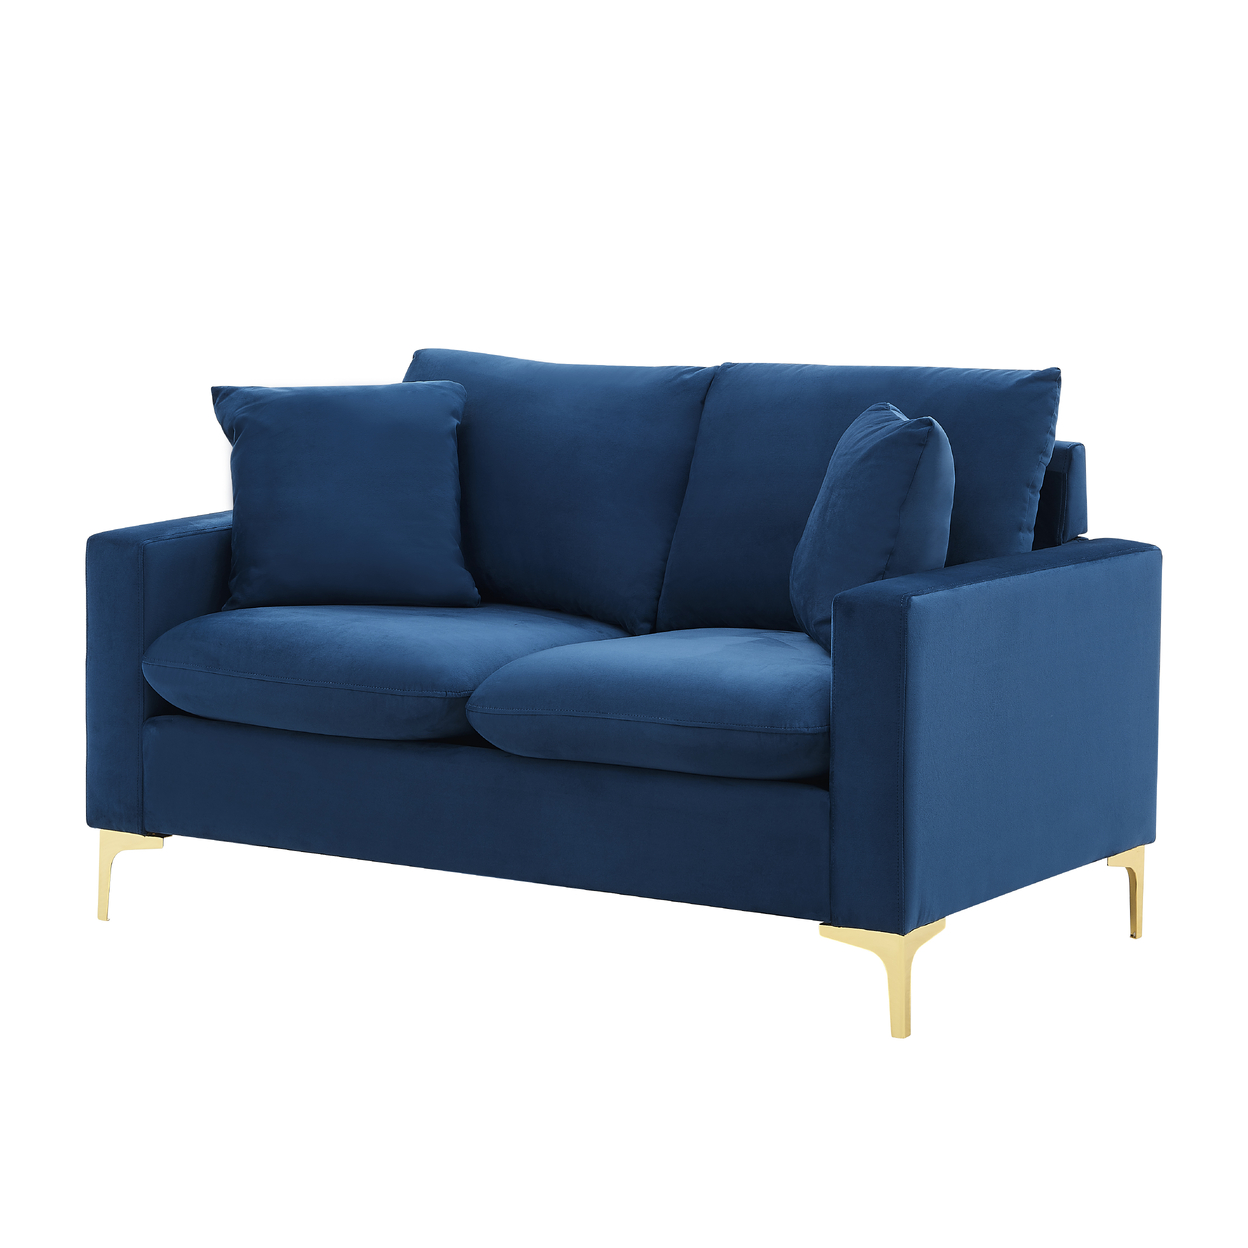 Iconic Home Roxi Loveseat Velvet Upholstered Multi-Cushion Seat Gold Tone Metal Y-Legs With 2 Decorative Pillows - Gold